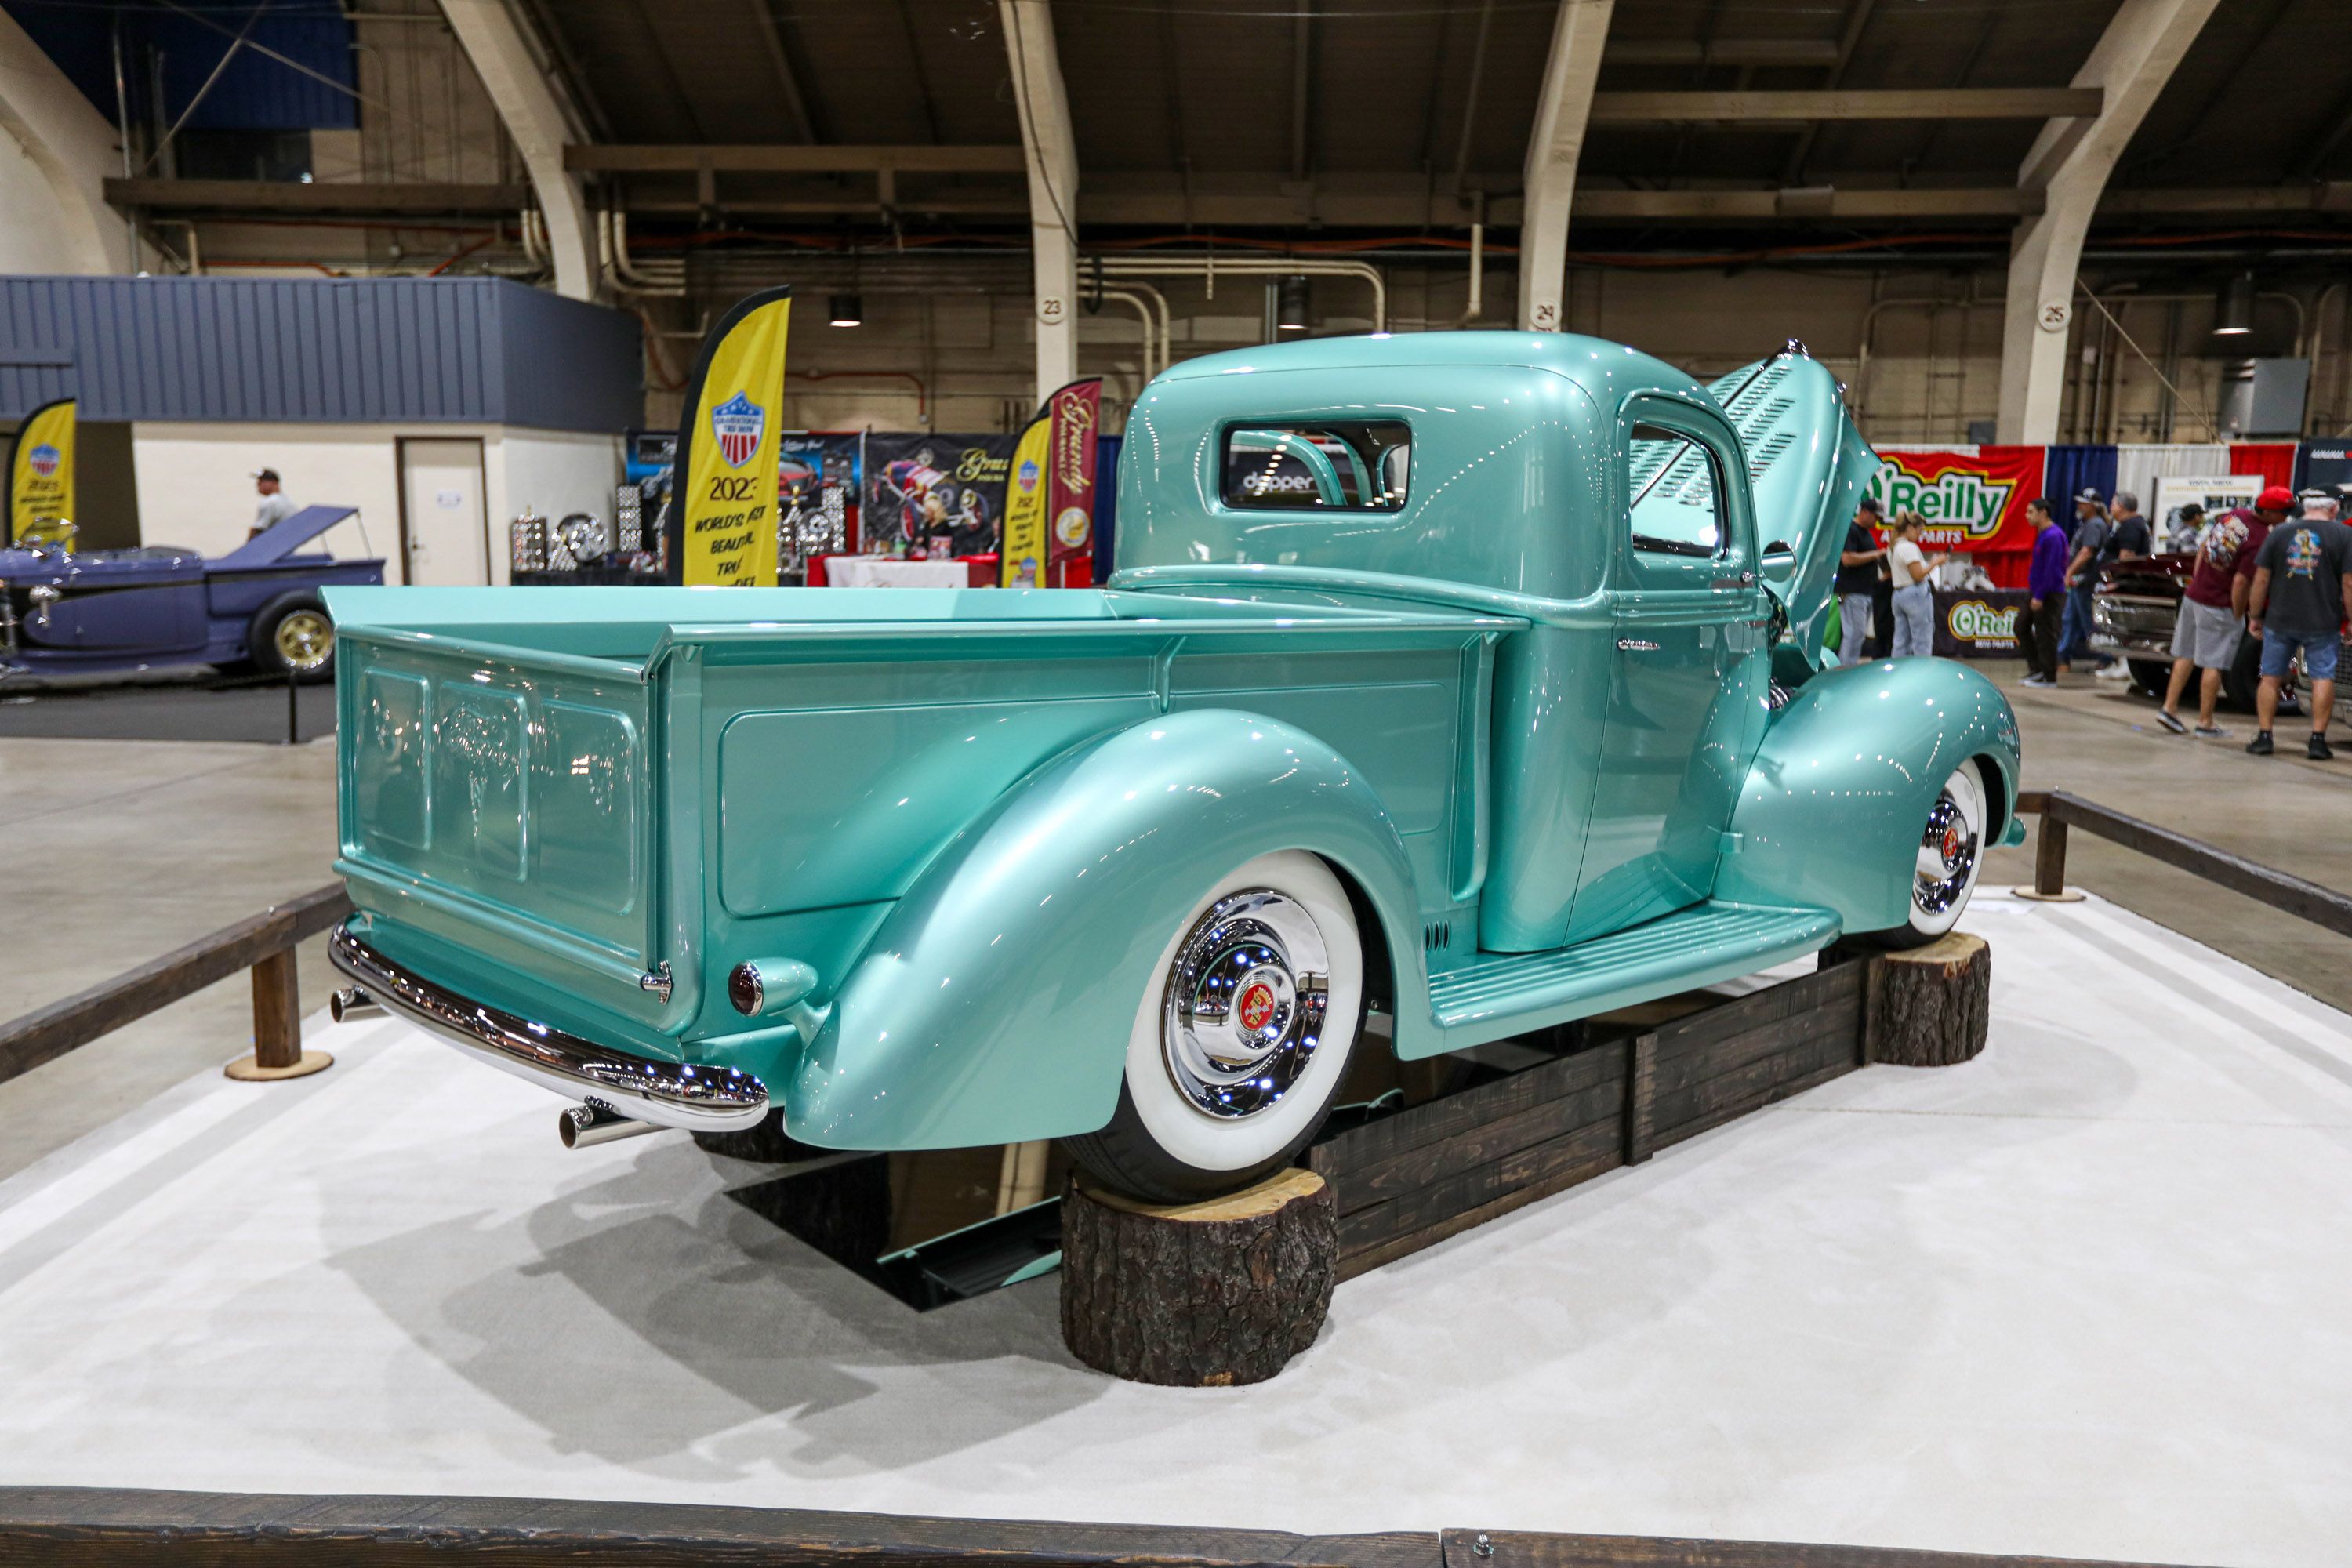 Stunningly Striking in Attractive Blue: The 1940 Ford Claims Title of World’s Most Exquisite Truck